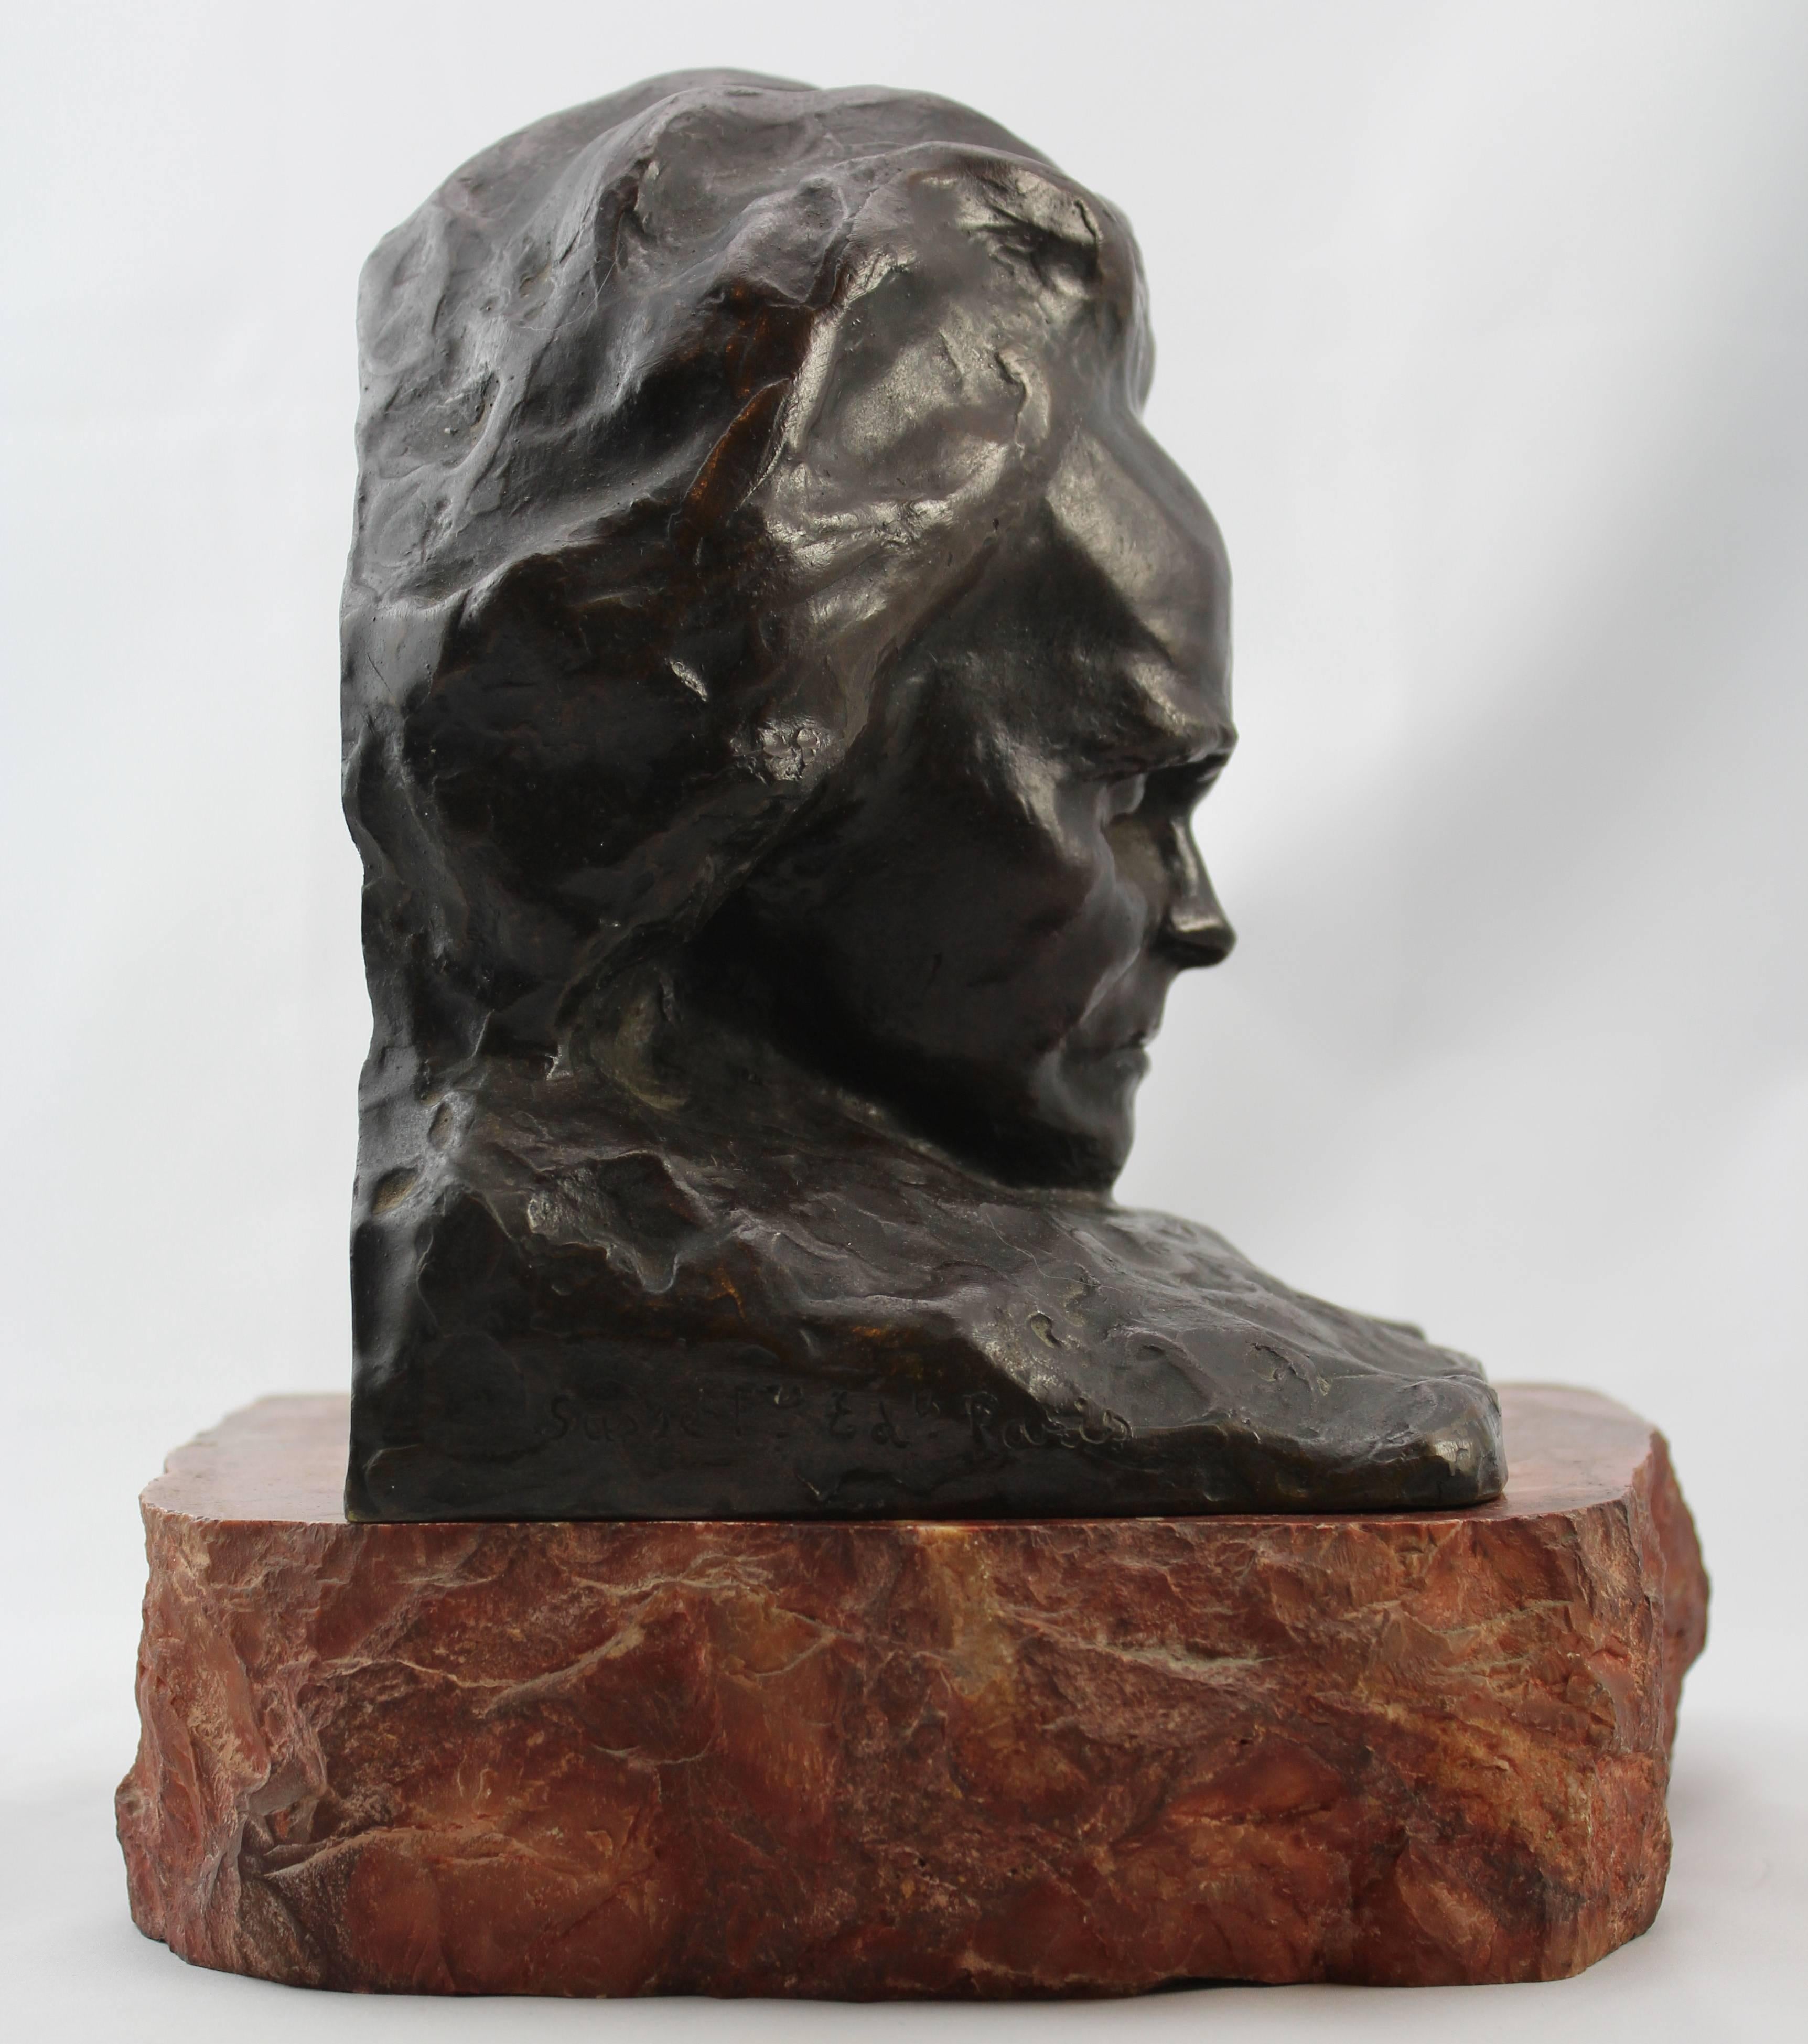 Paul Gaston Deprez (1872-1941) bronze sculpture bust of beethoven, circa 1900. Beautiful period marble stand included.

Signed G. Deprez
Foundry Mark: Susse Fres Ed Paris
Stamped Foundry mark
Marked 